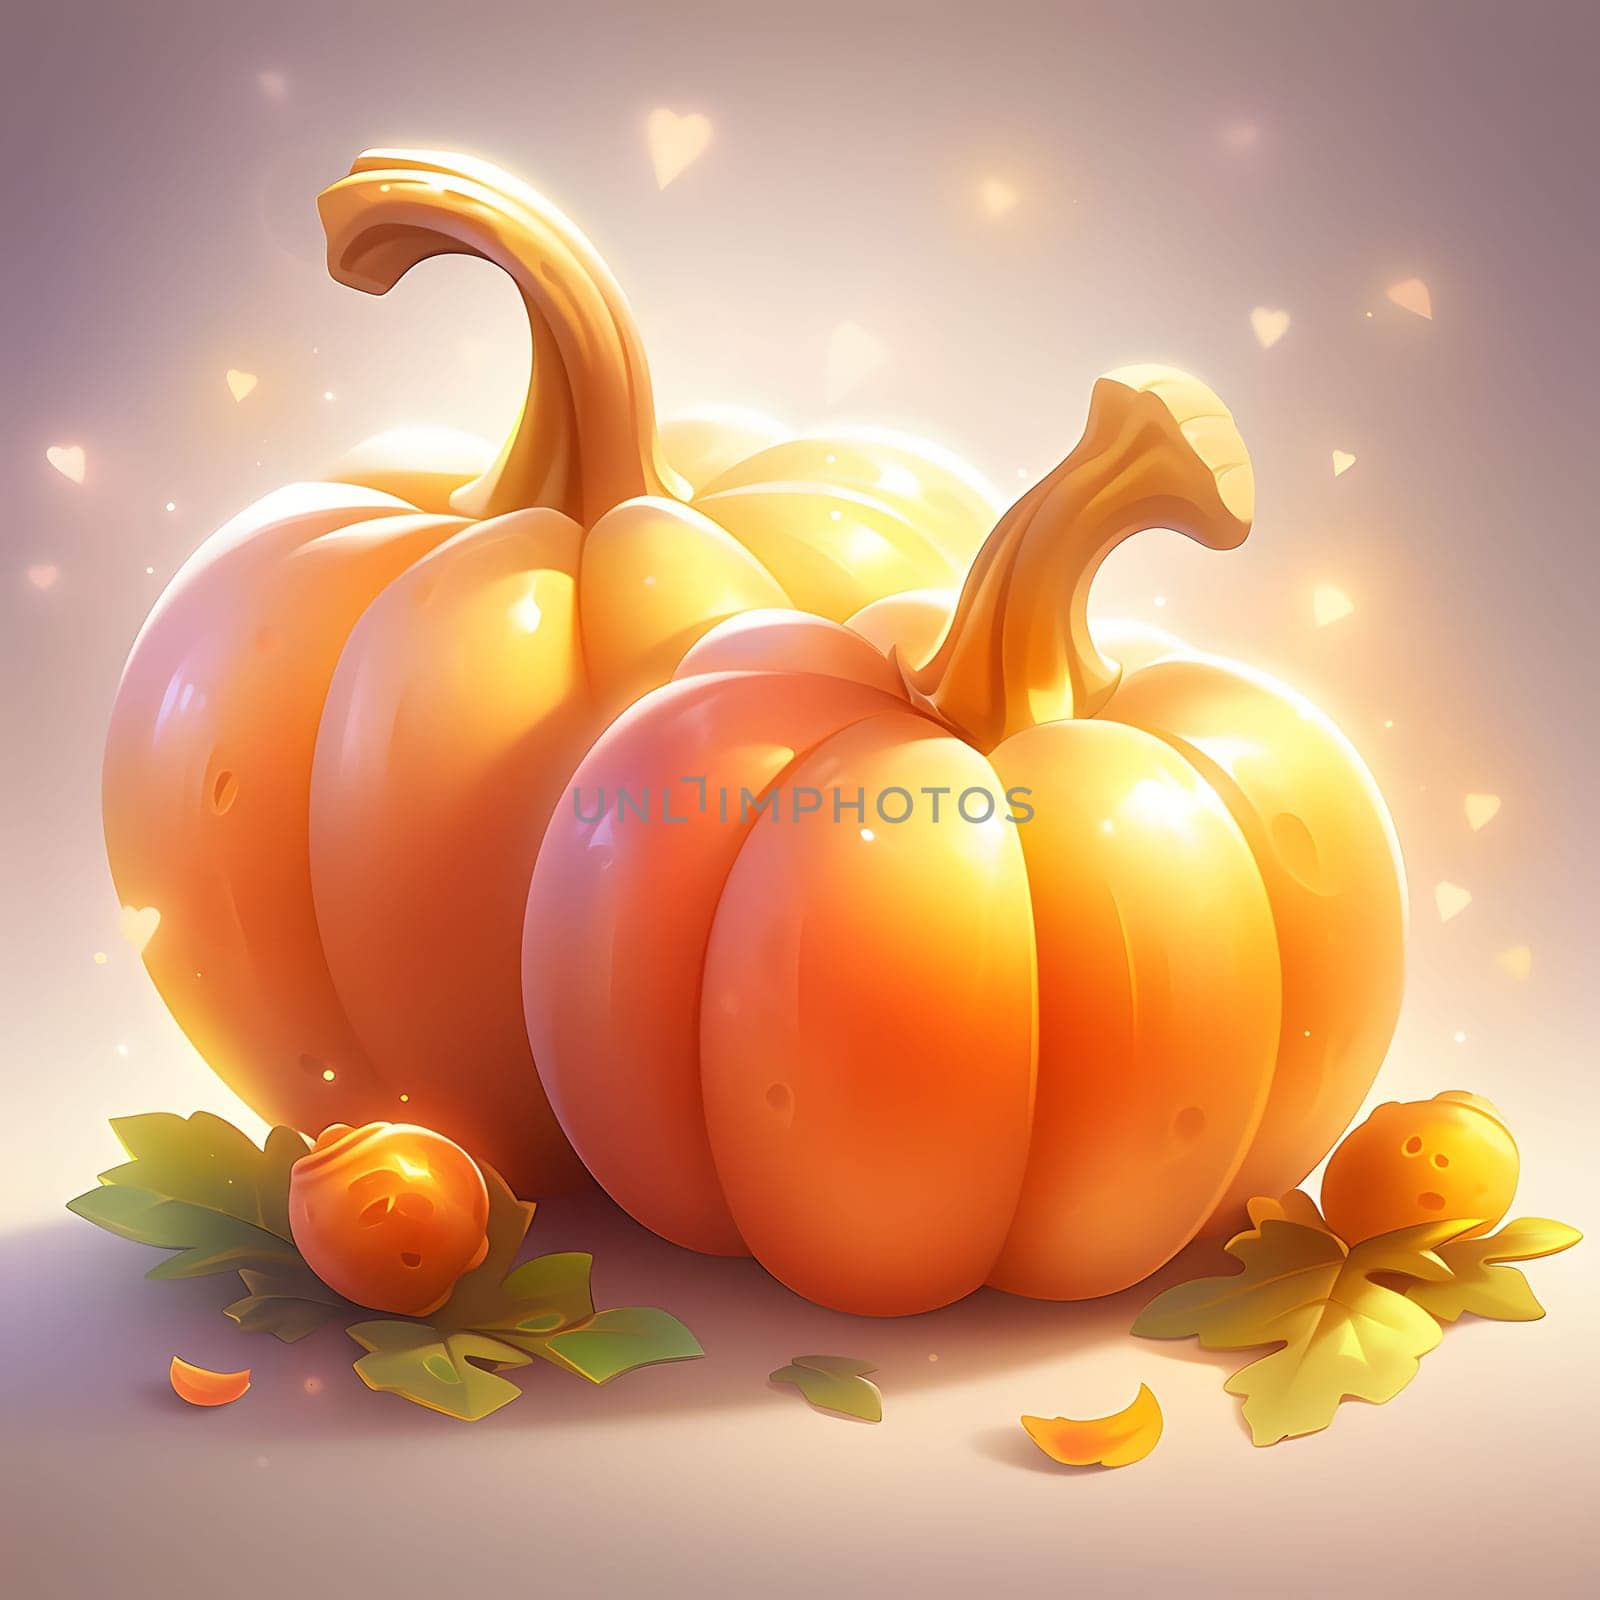 Two fairy pumpkins on a bright background all around falling hearts of light. Pumpkin as a dish of thanksgiving for the harvest. An atmosphere of joy and celebration.